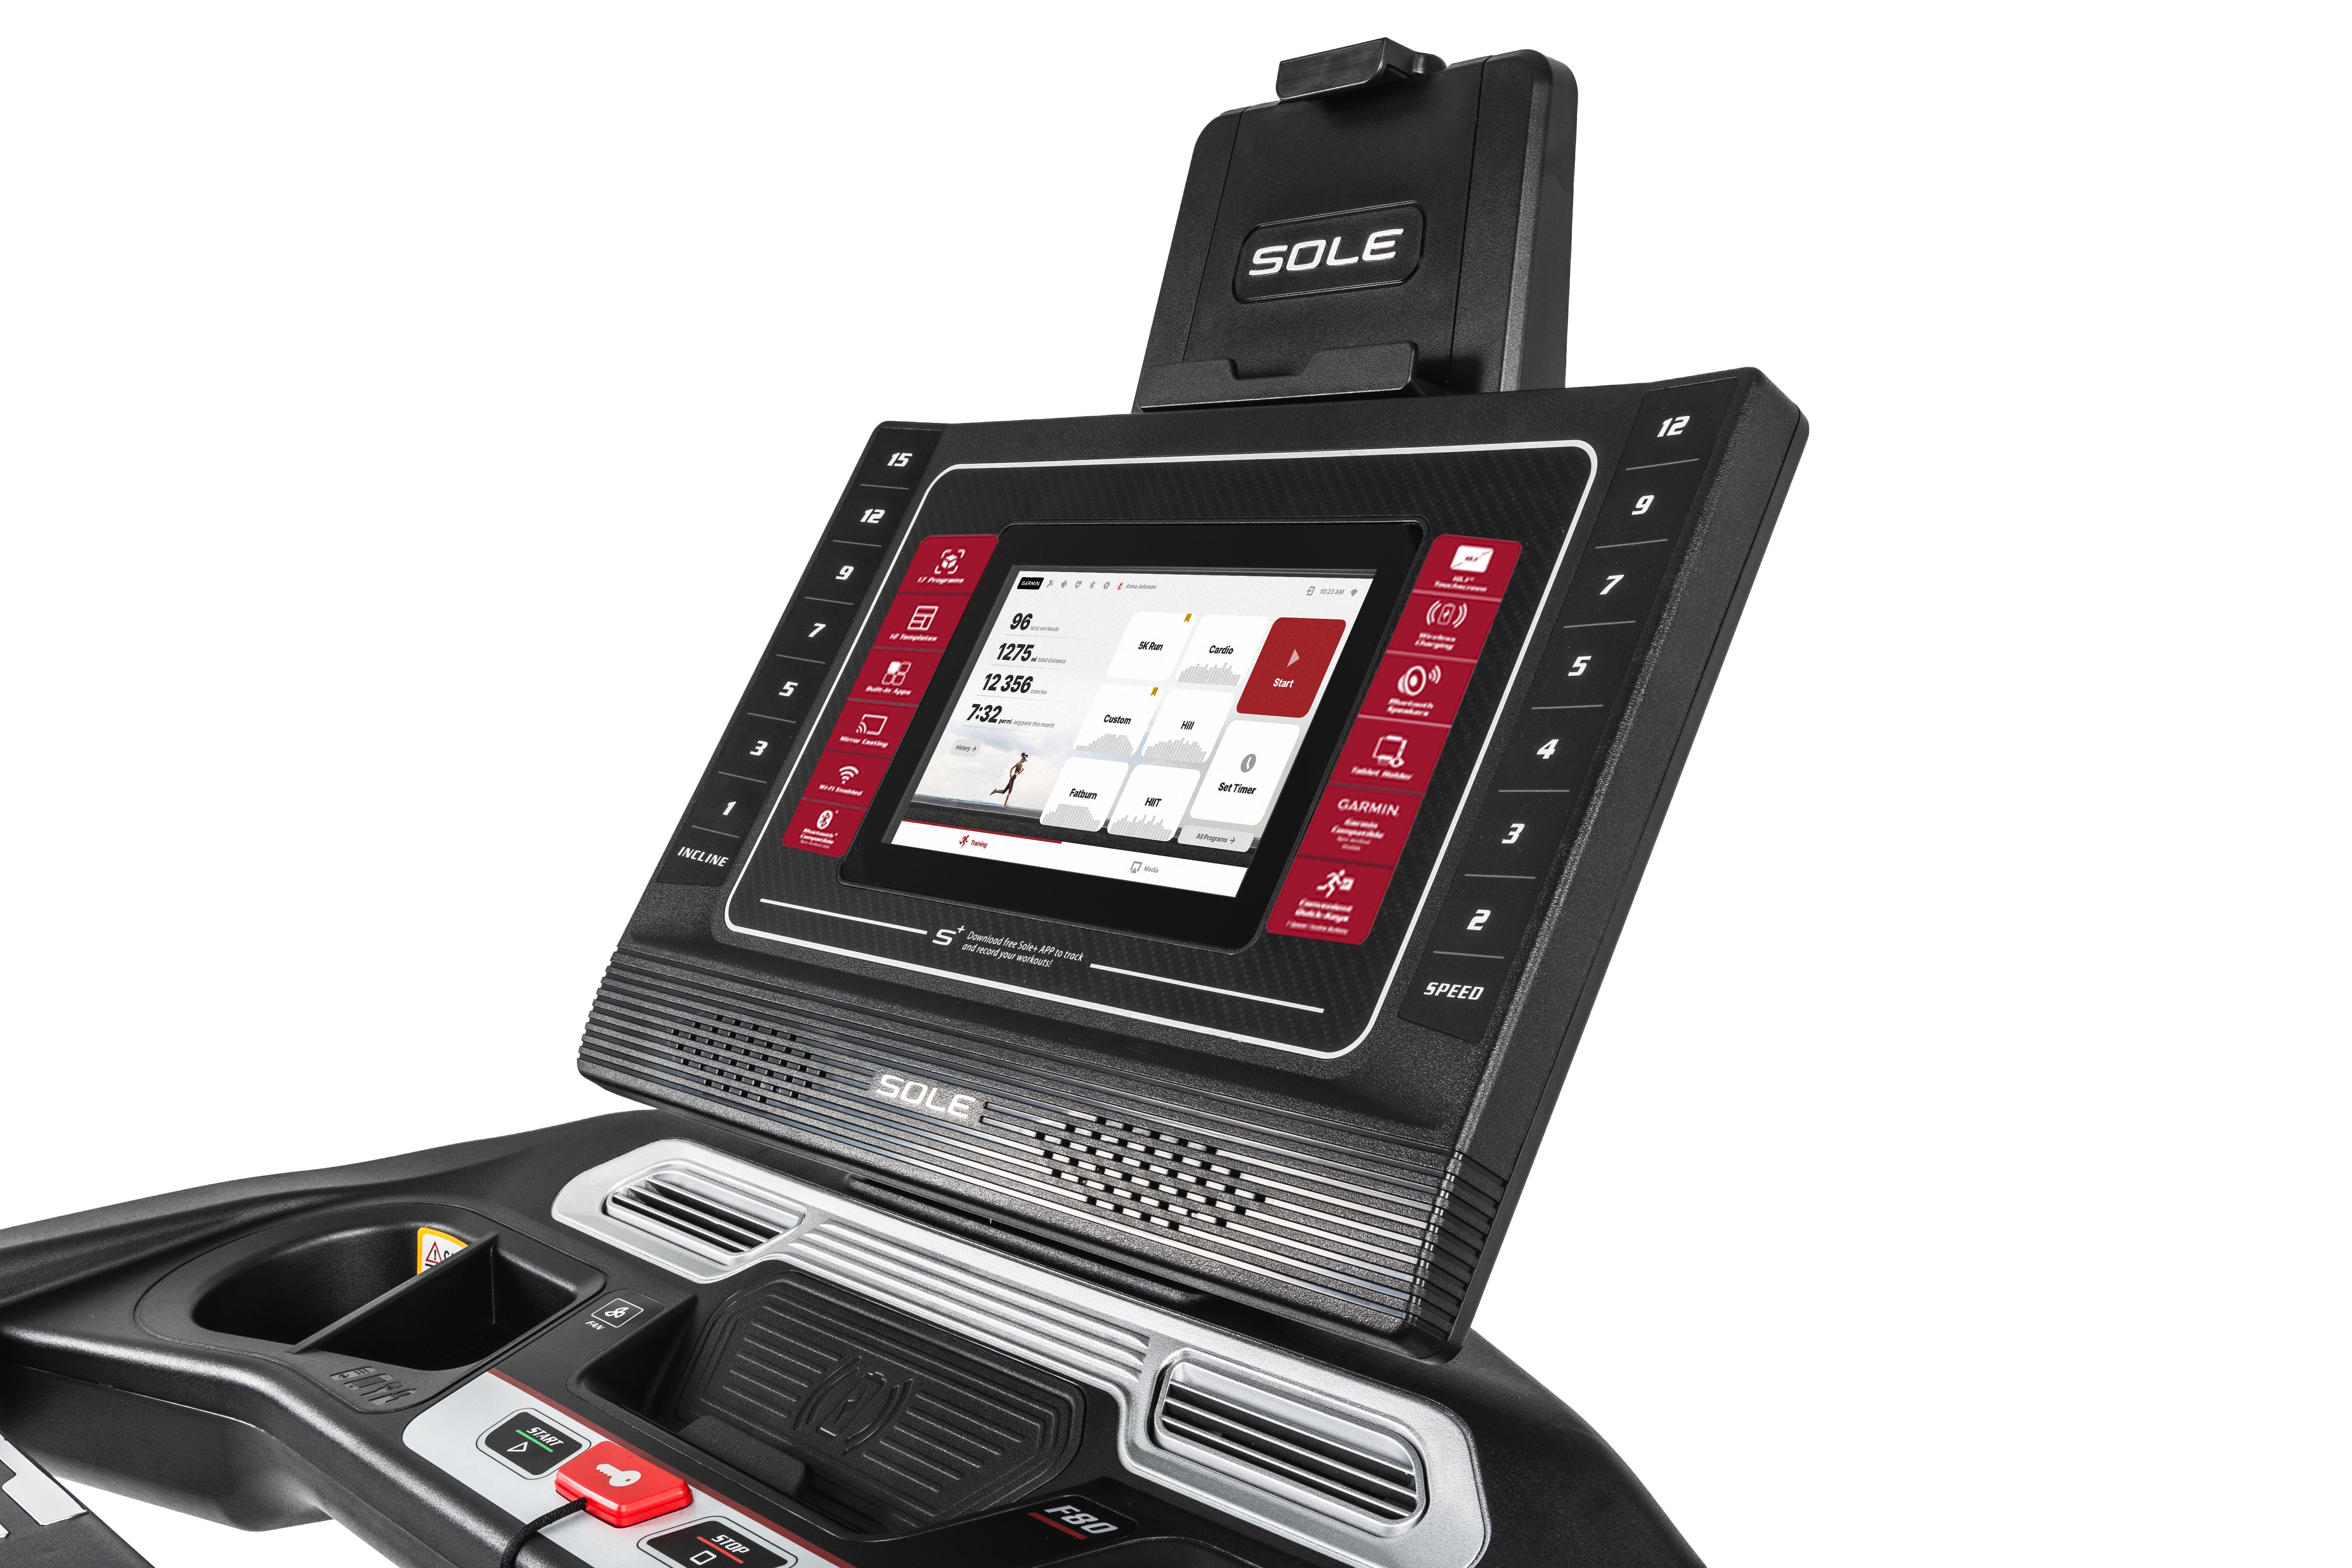 Close-up view of the Sole F80 treadmill's console, featuring a large digital touchscreen displaying workout metrics, side buttons for incline and speed adjustments, the 'SOLE' logo on the tablet holder, and a storage compartment with safety key slot on the lower section.